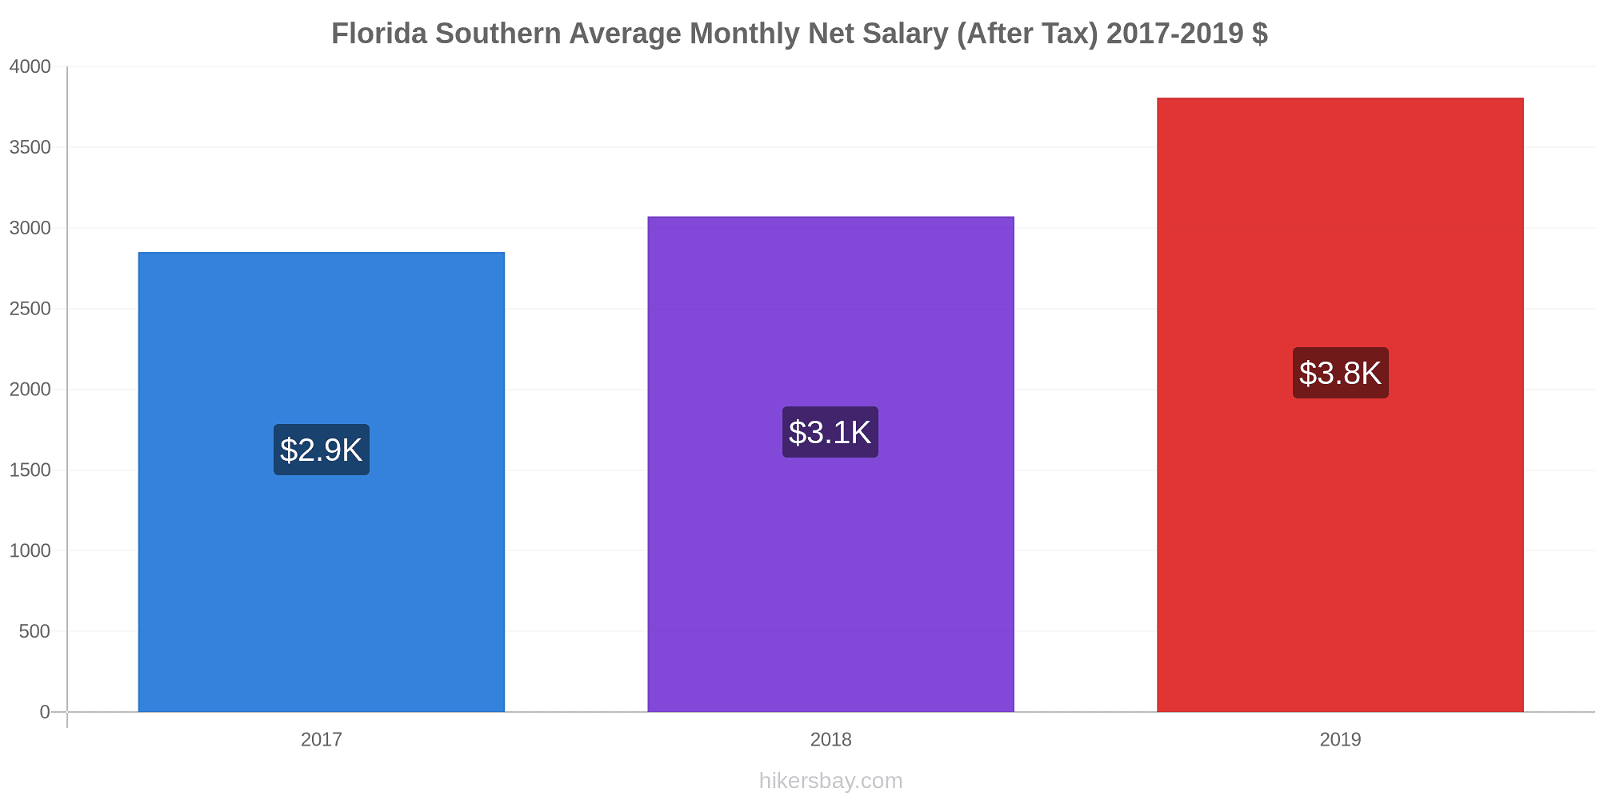 Florida Southern price changes Average Monthly Net Salary (After Tax) hikersbay.com